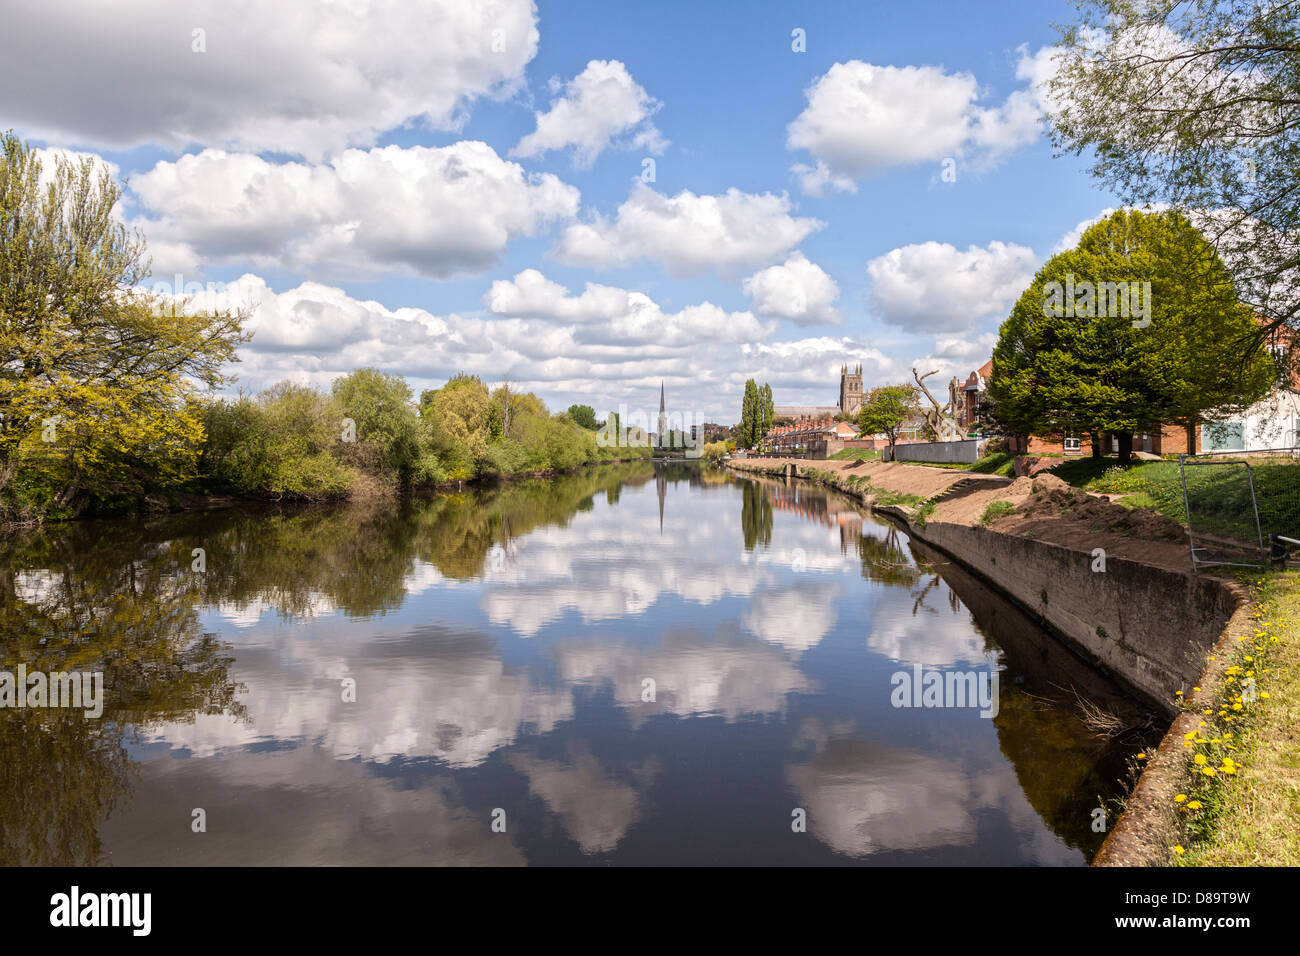 A fine spring day on the River Severn at Worcester, England, with clouds reflecting in the water. Stock Photo